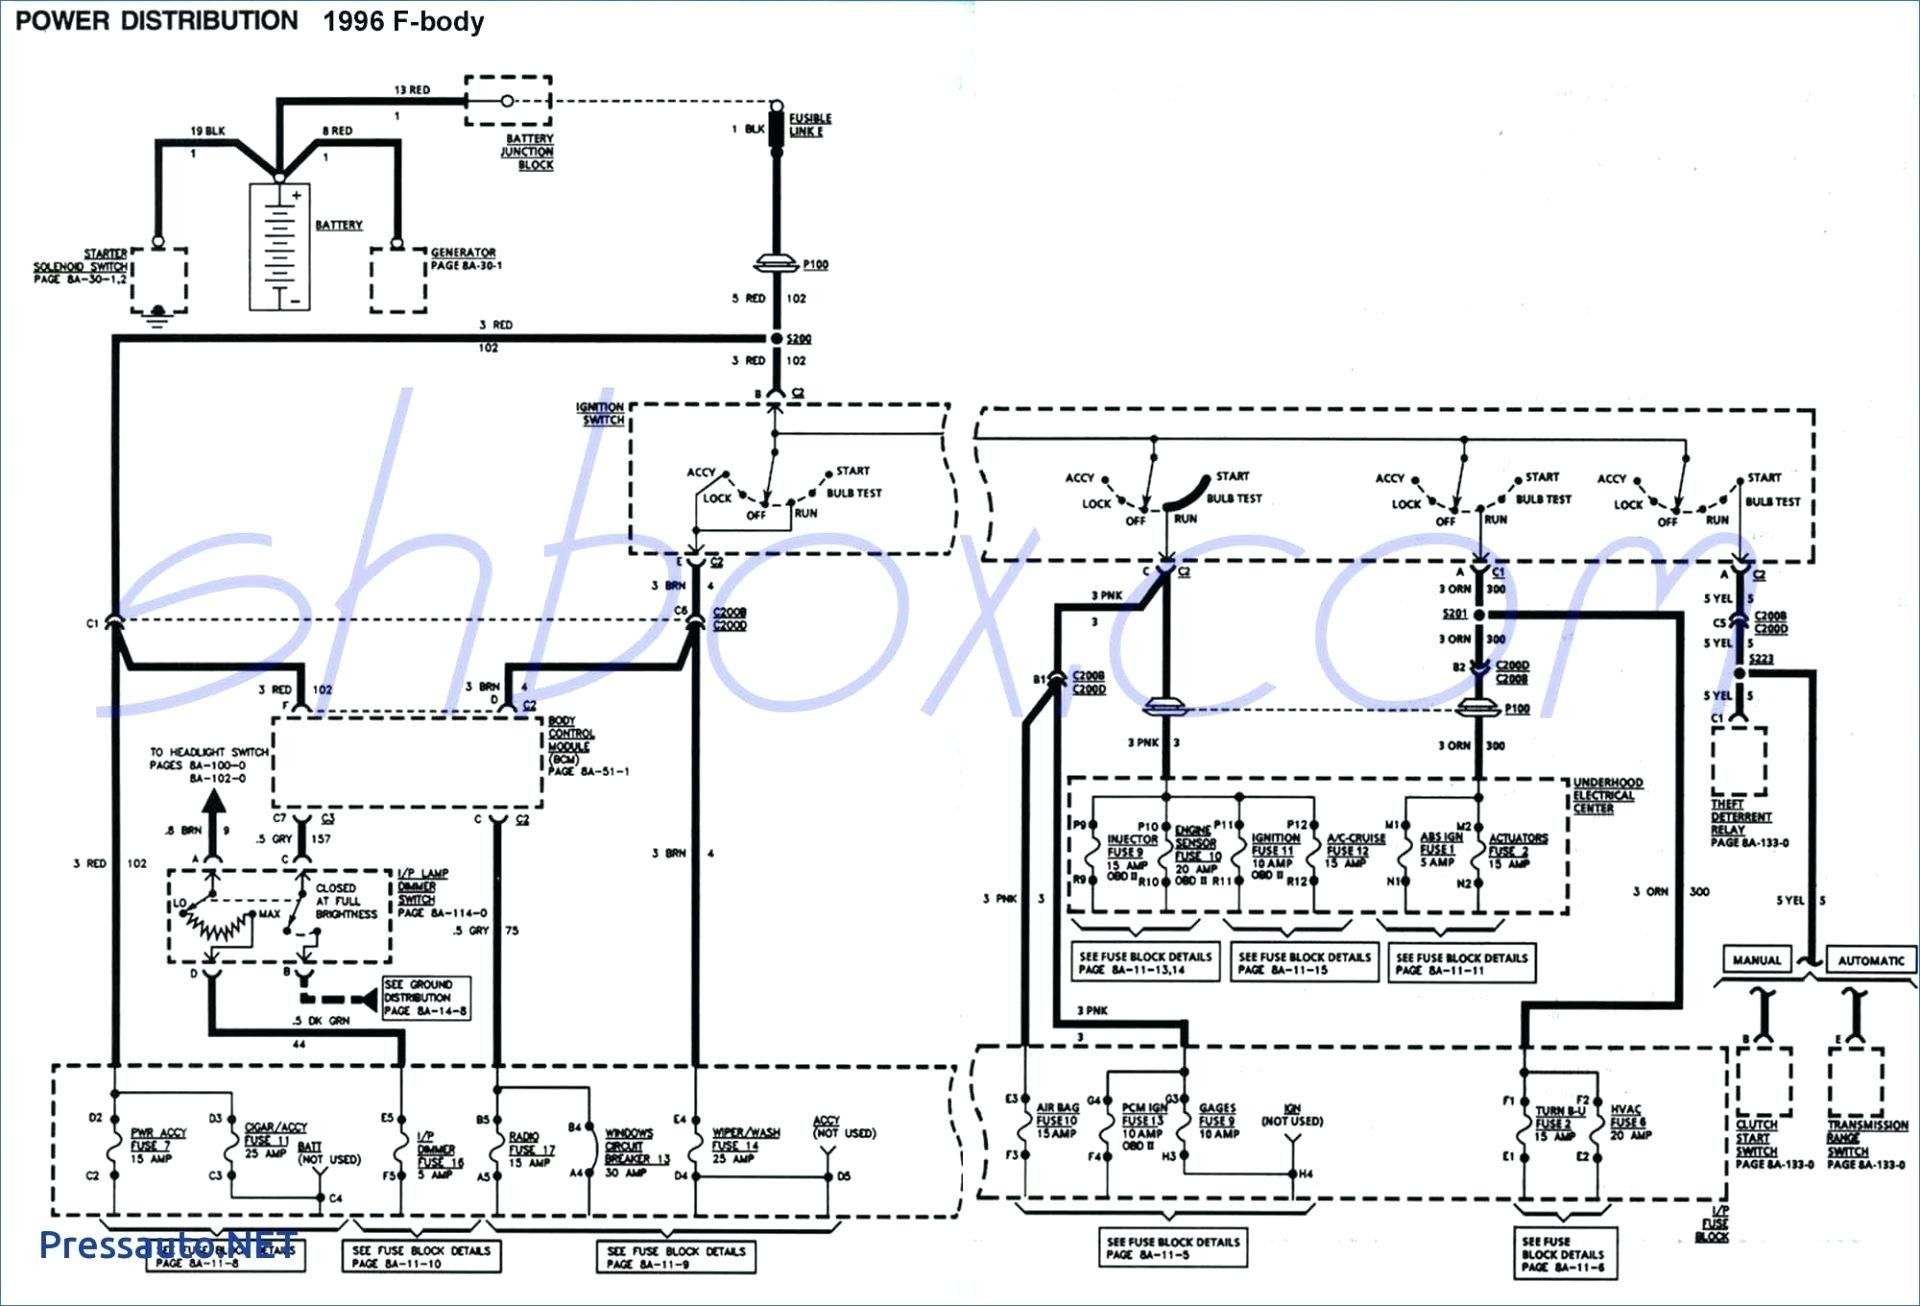 House Wiring Diagram Template Best Electrical Wiring Diagram Two Way Switch Valid 3 Way Switch Diagram